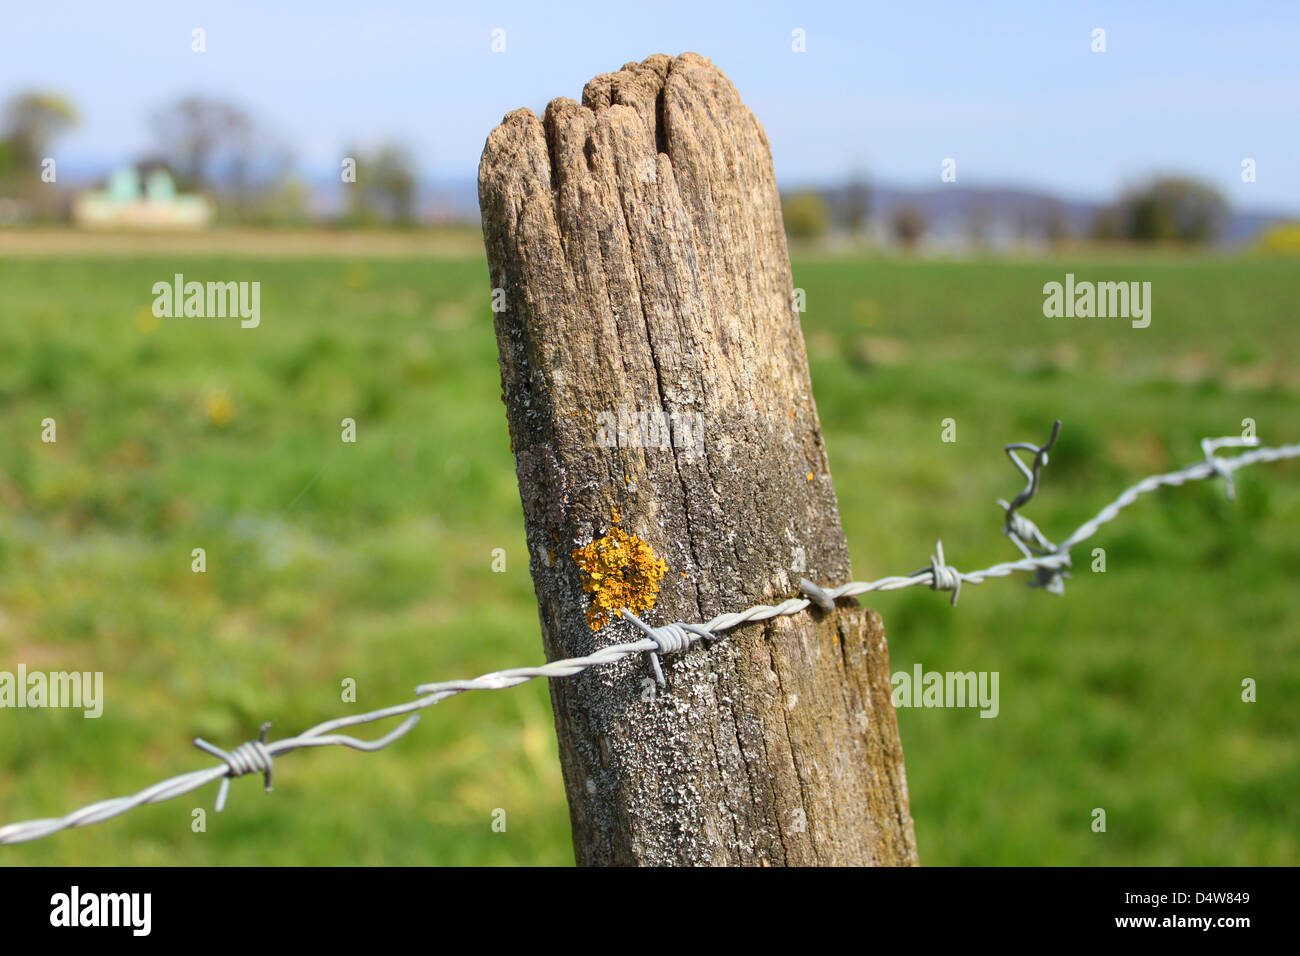 A wooden fence post with barbed wire against a green background. Taken on a farm in Switzerland. Stock Photo